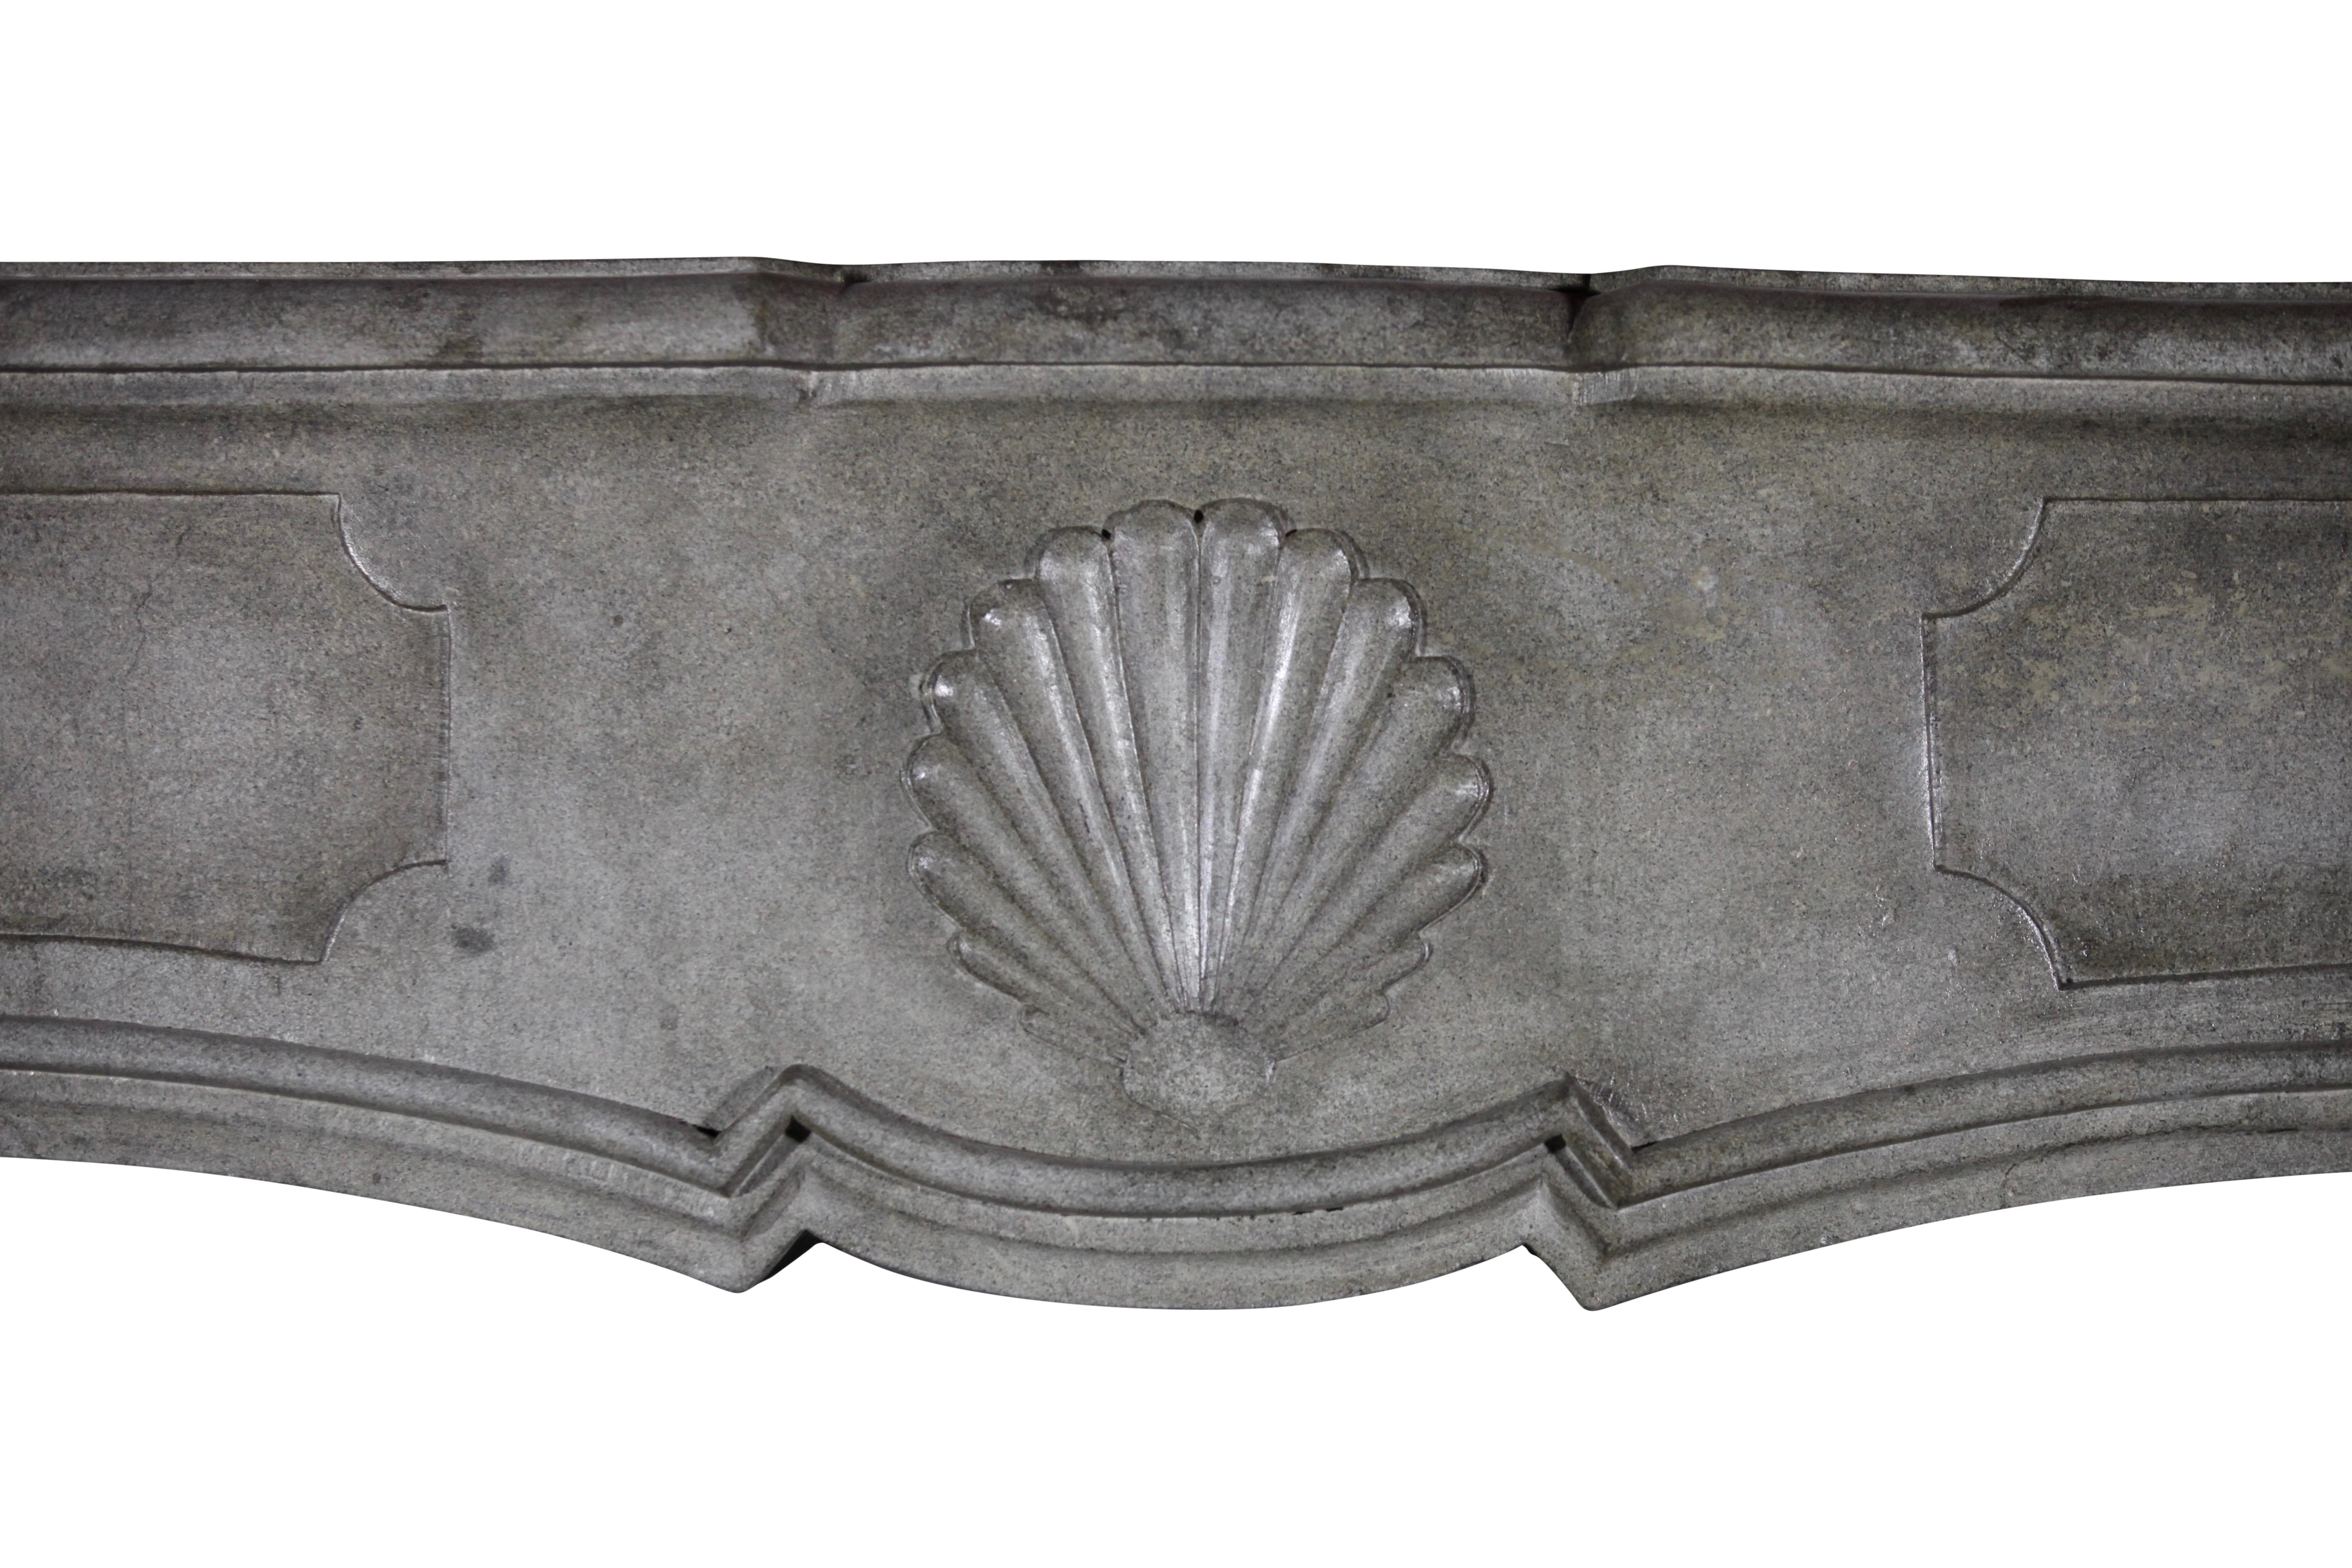 This is a grand, one of a kind, original French antique fireplace surround. It was made in a grey bicolor Marble hard stone. It reflects the light in the room and has a silky feeling touching it. The depth the pannels on the front are rich. The